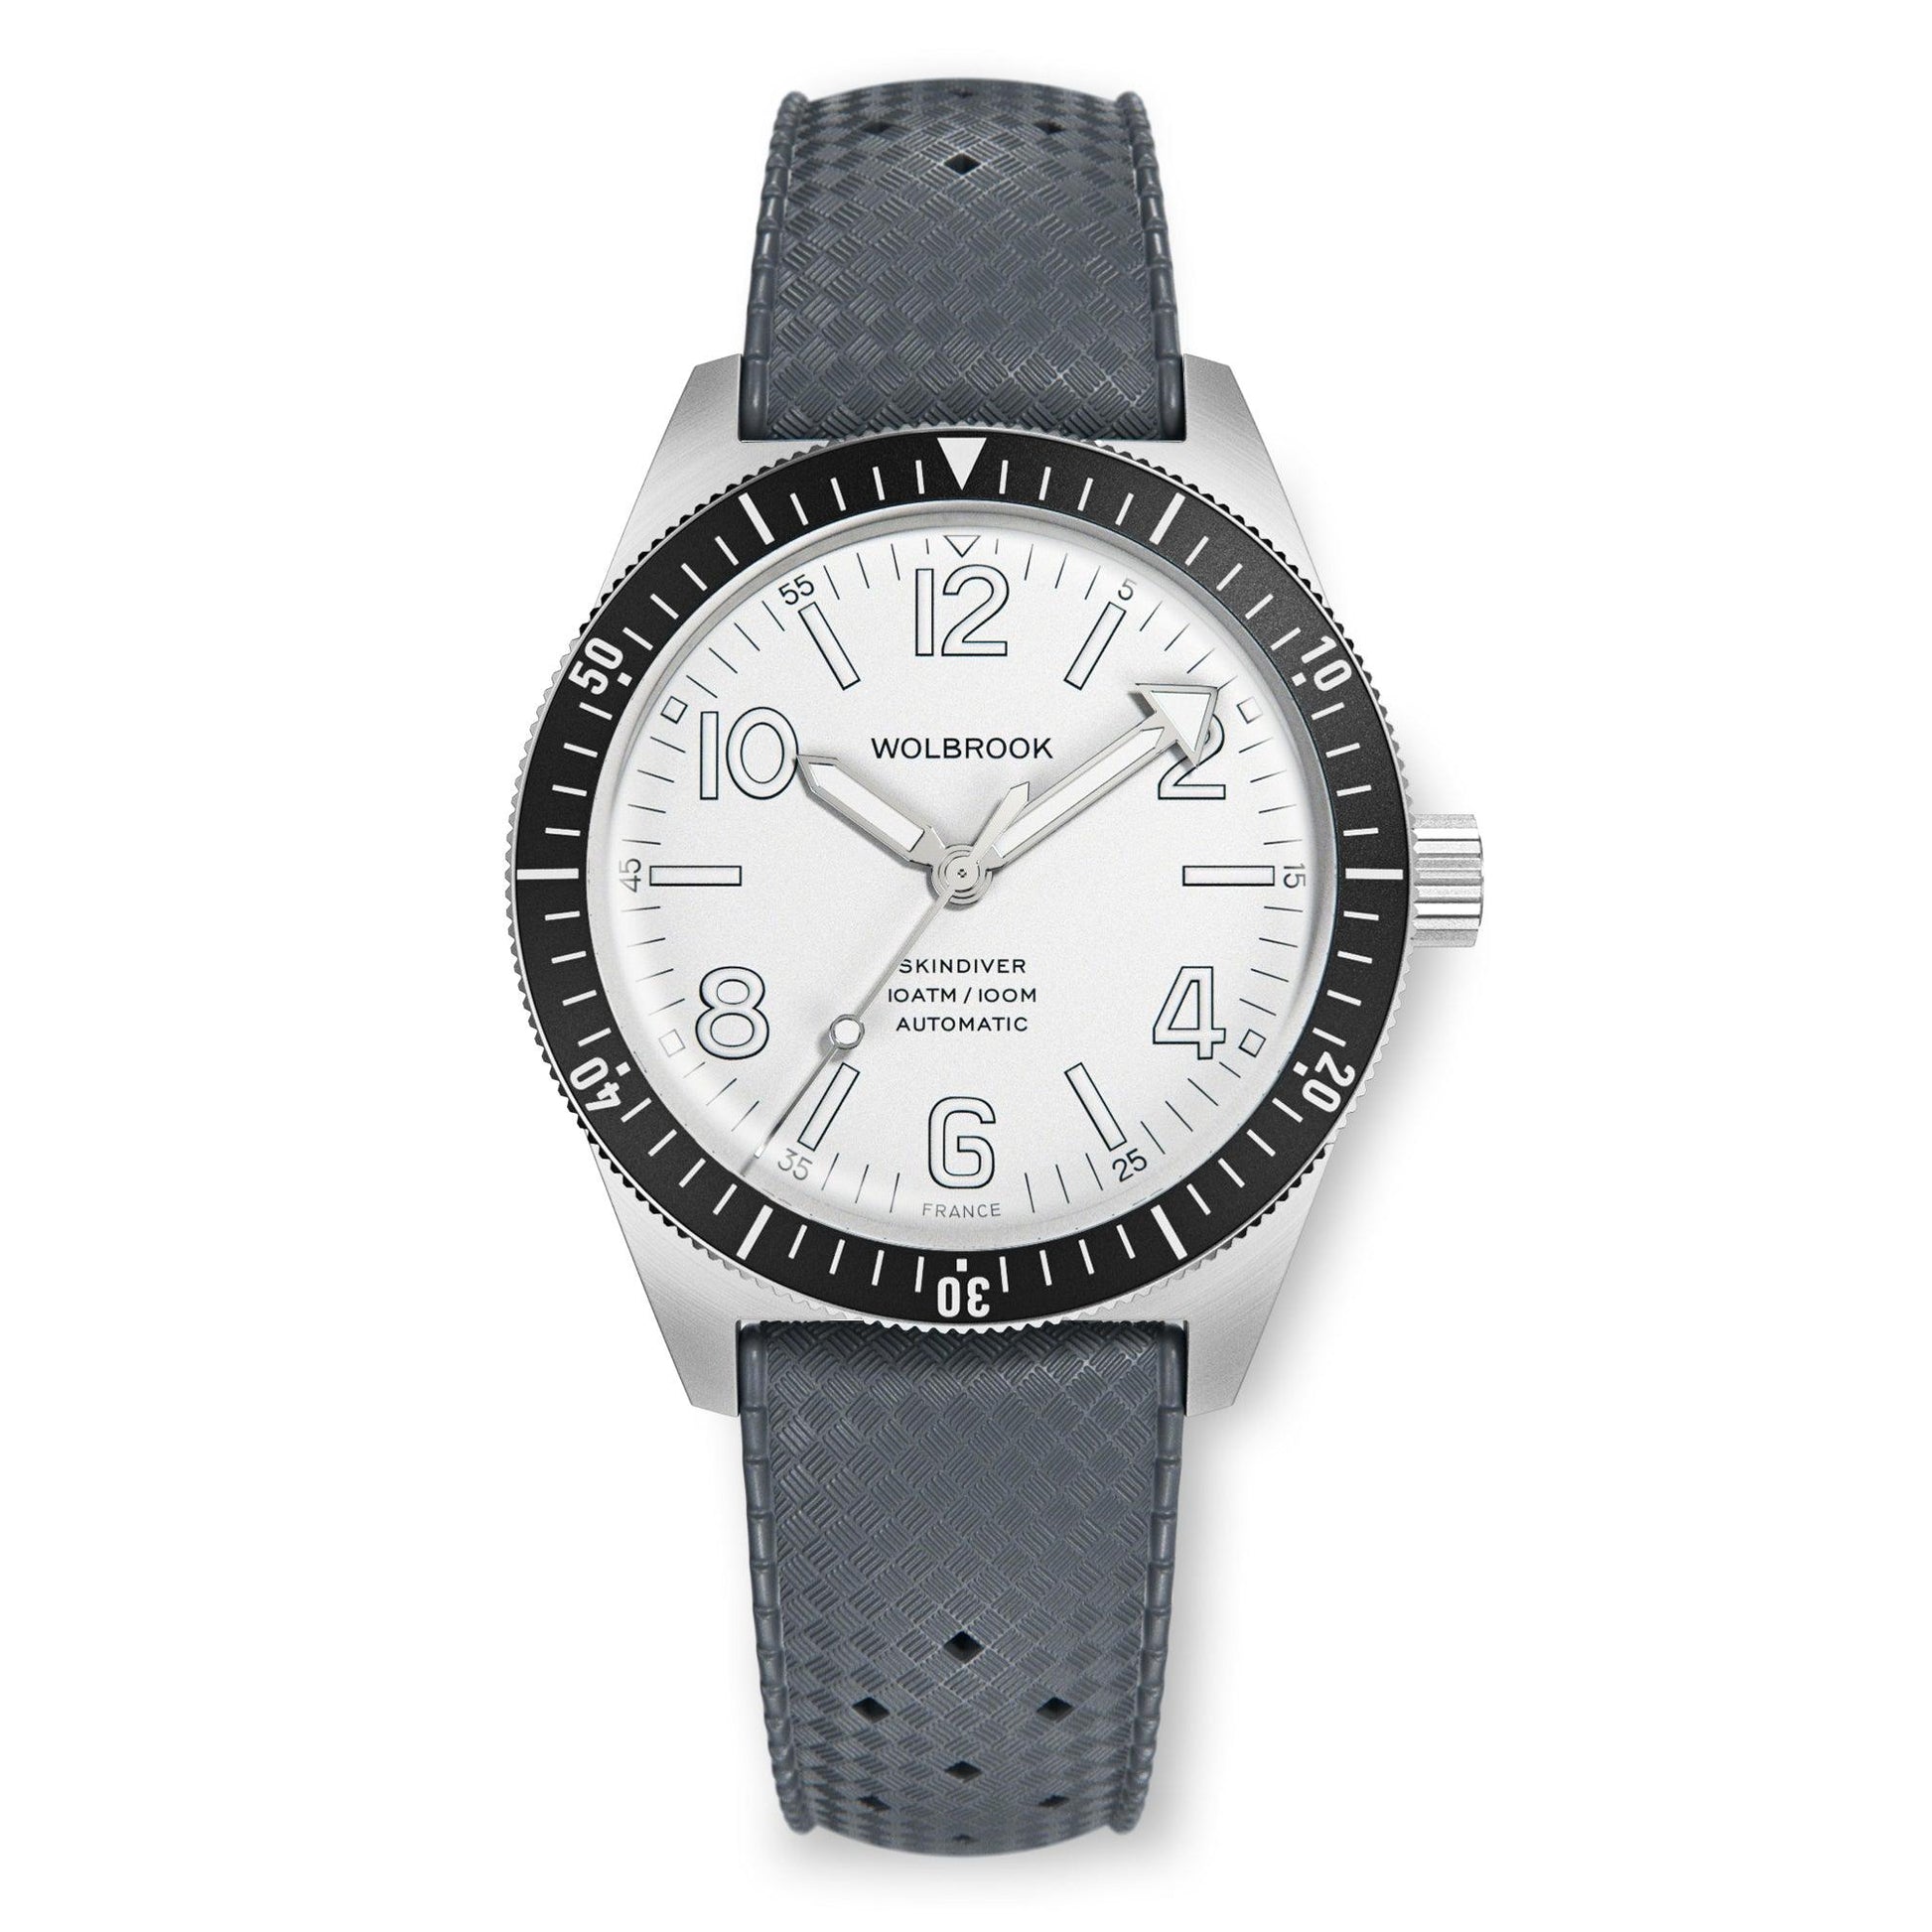 Skindiver Automatic Watch – White Dial & Black Bezel - Wolbrook Watches